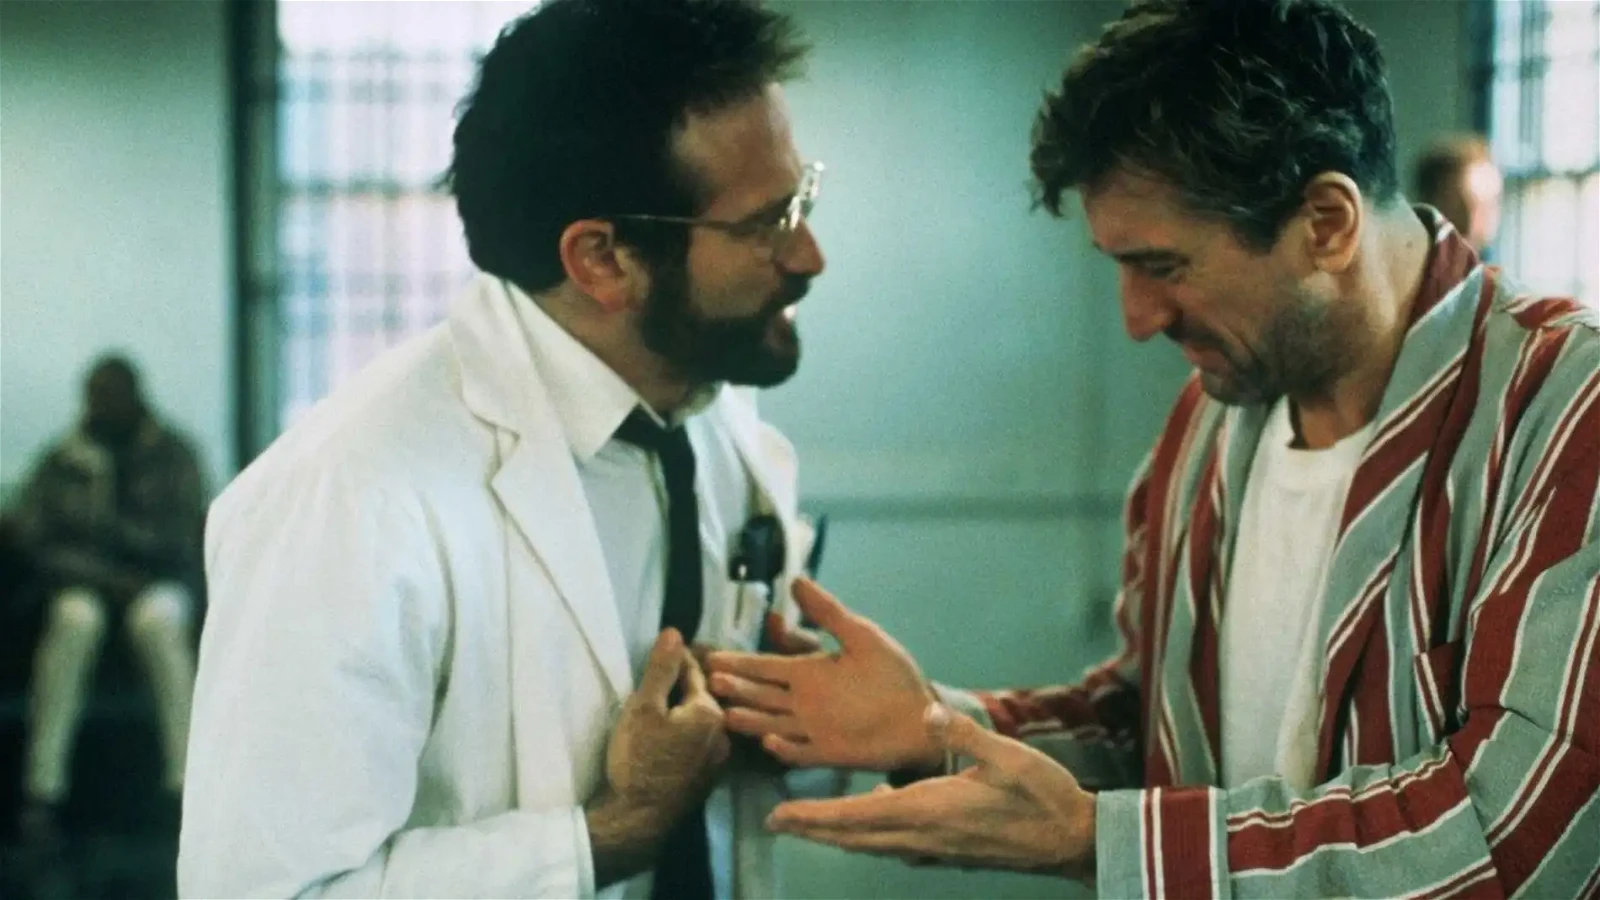 Robin Williams and Robert De Niro in a still from the movie